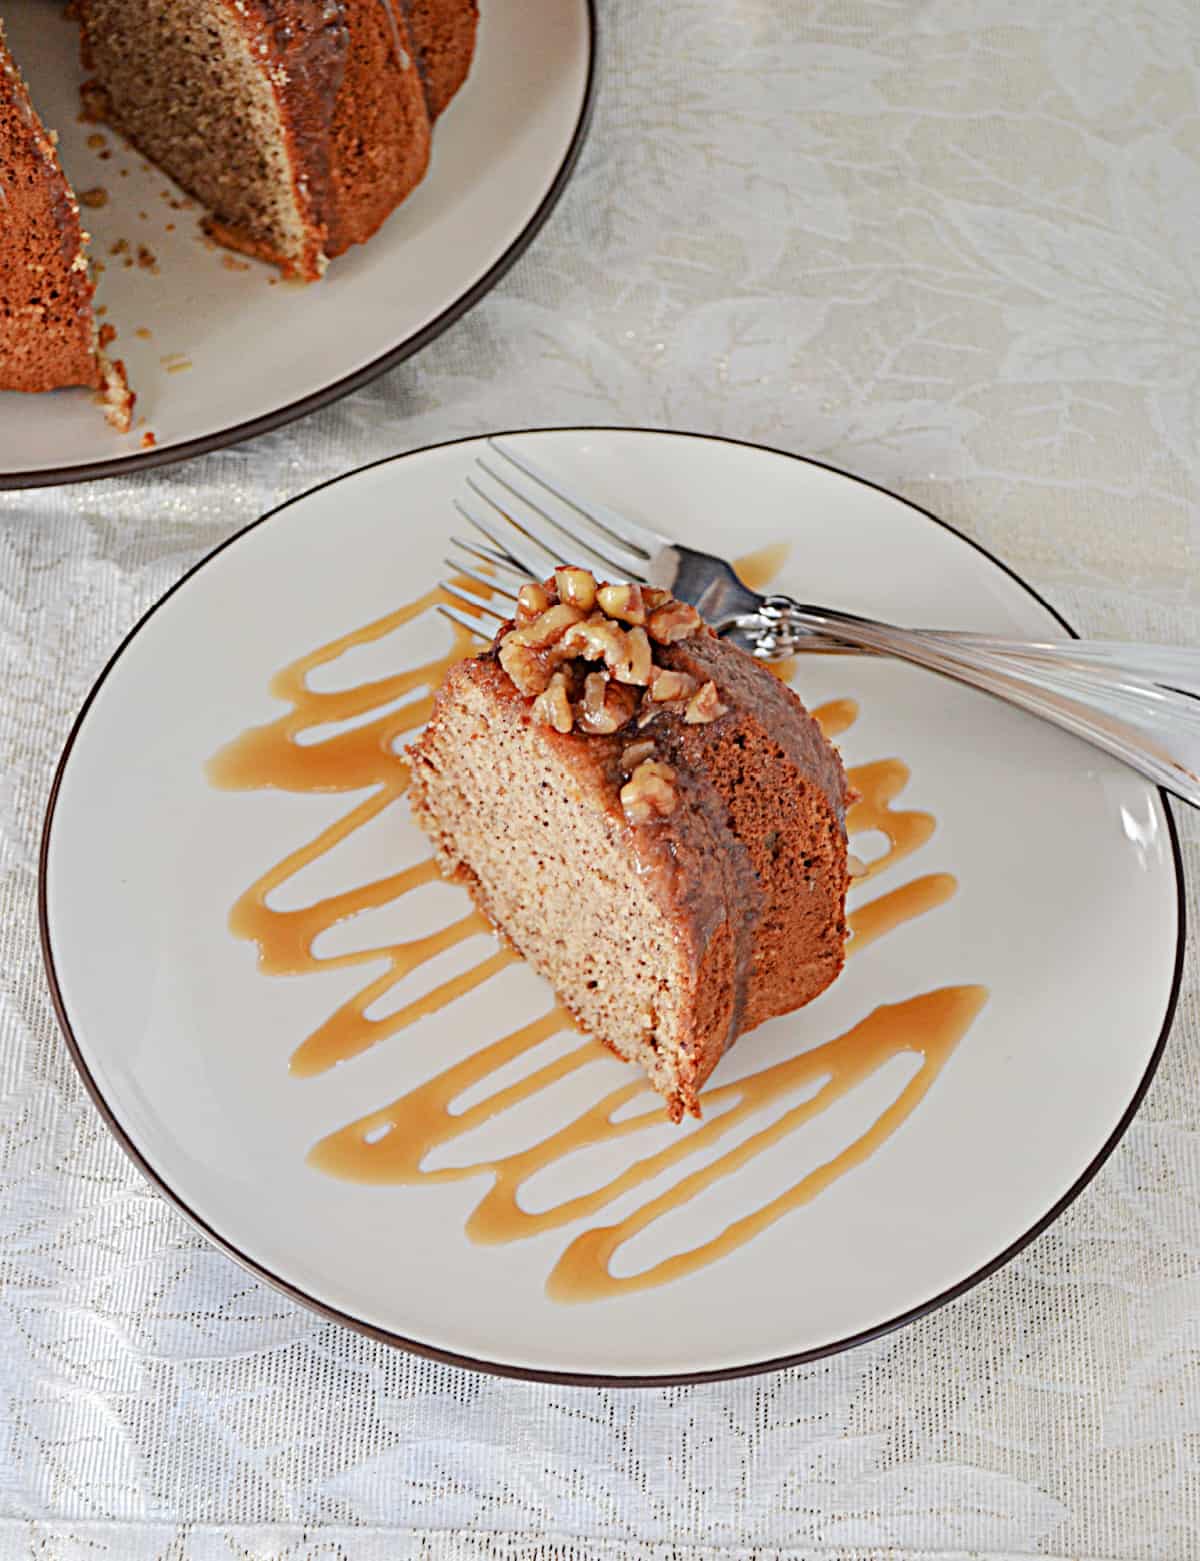 A slice of pecan cake drizzled with caramel sauce and a fork on the plate.